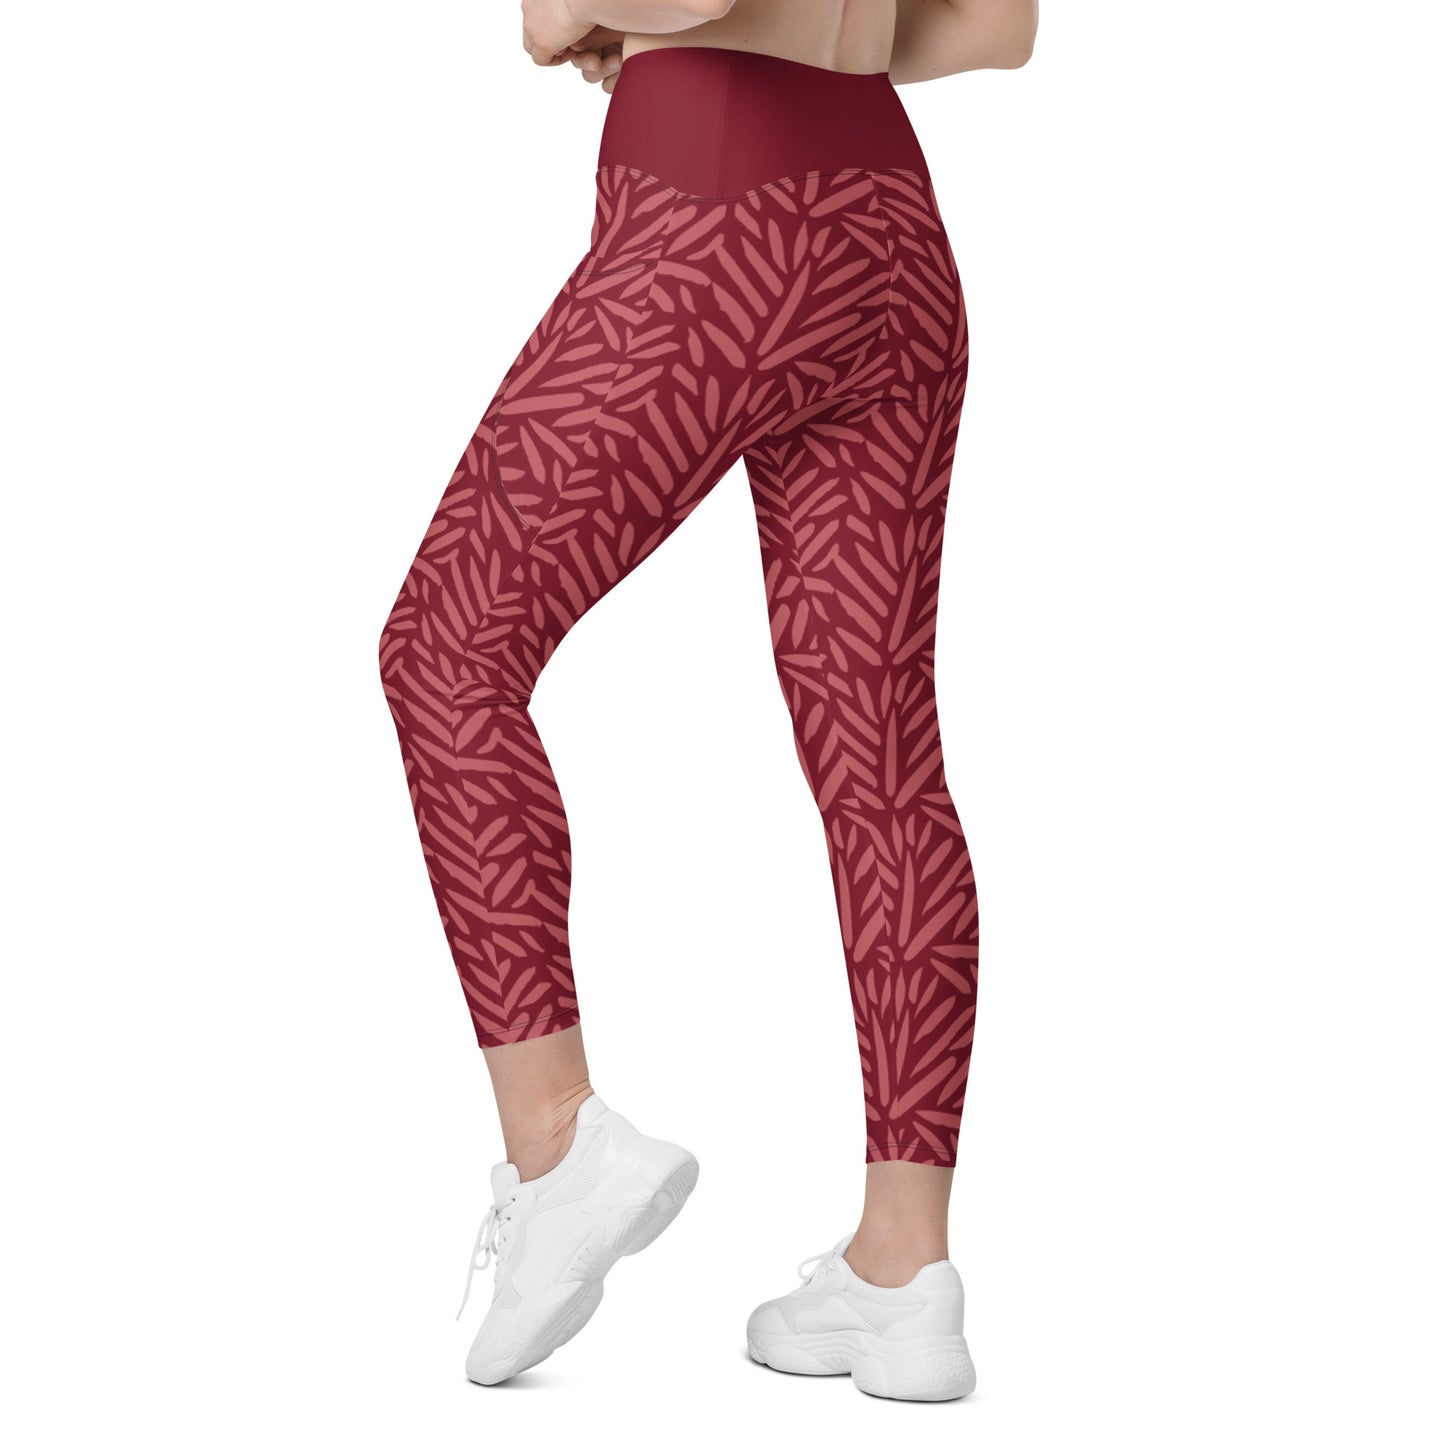  Jain ChillOut by Women's High-Waisted Support Leggings sold by Jain Yoga